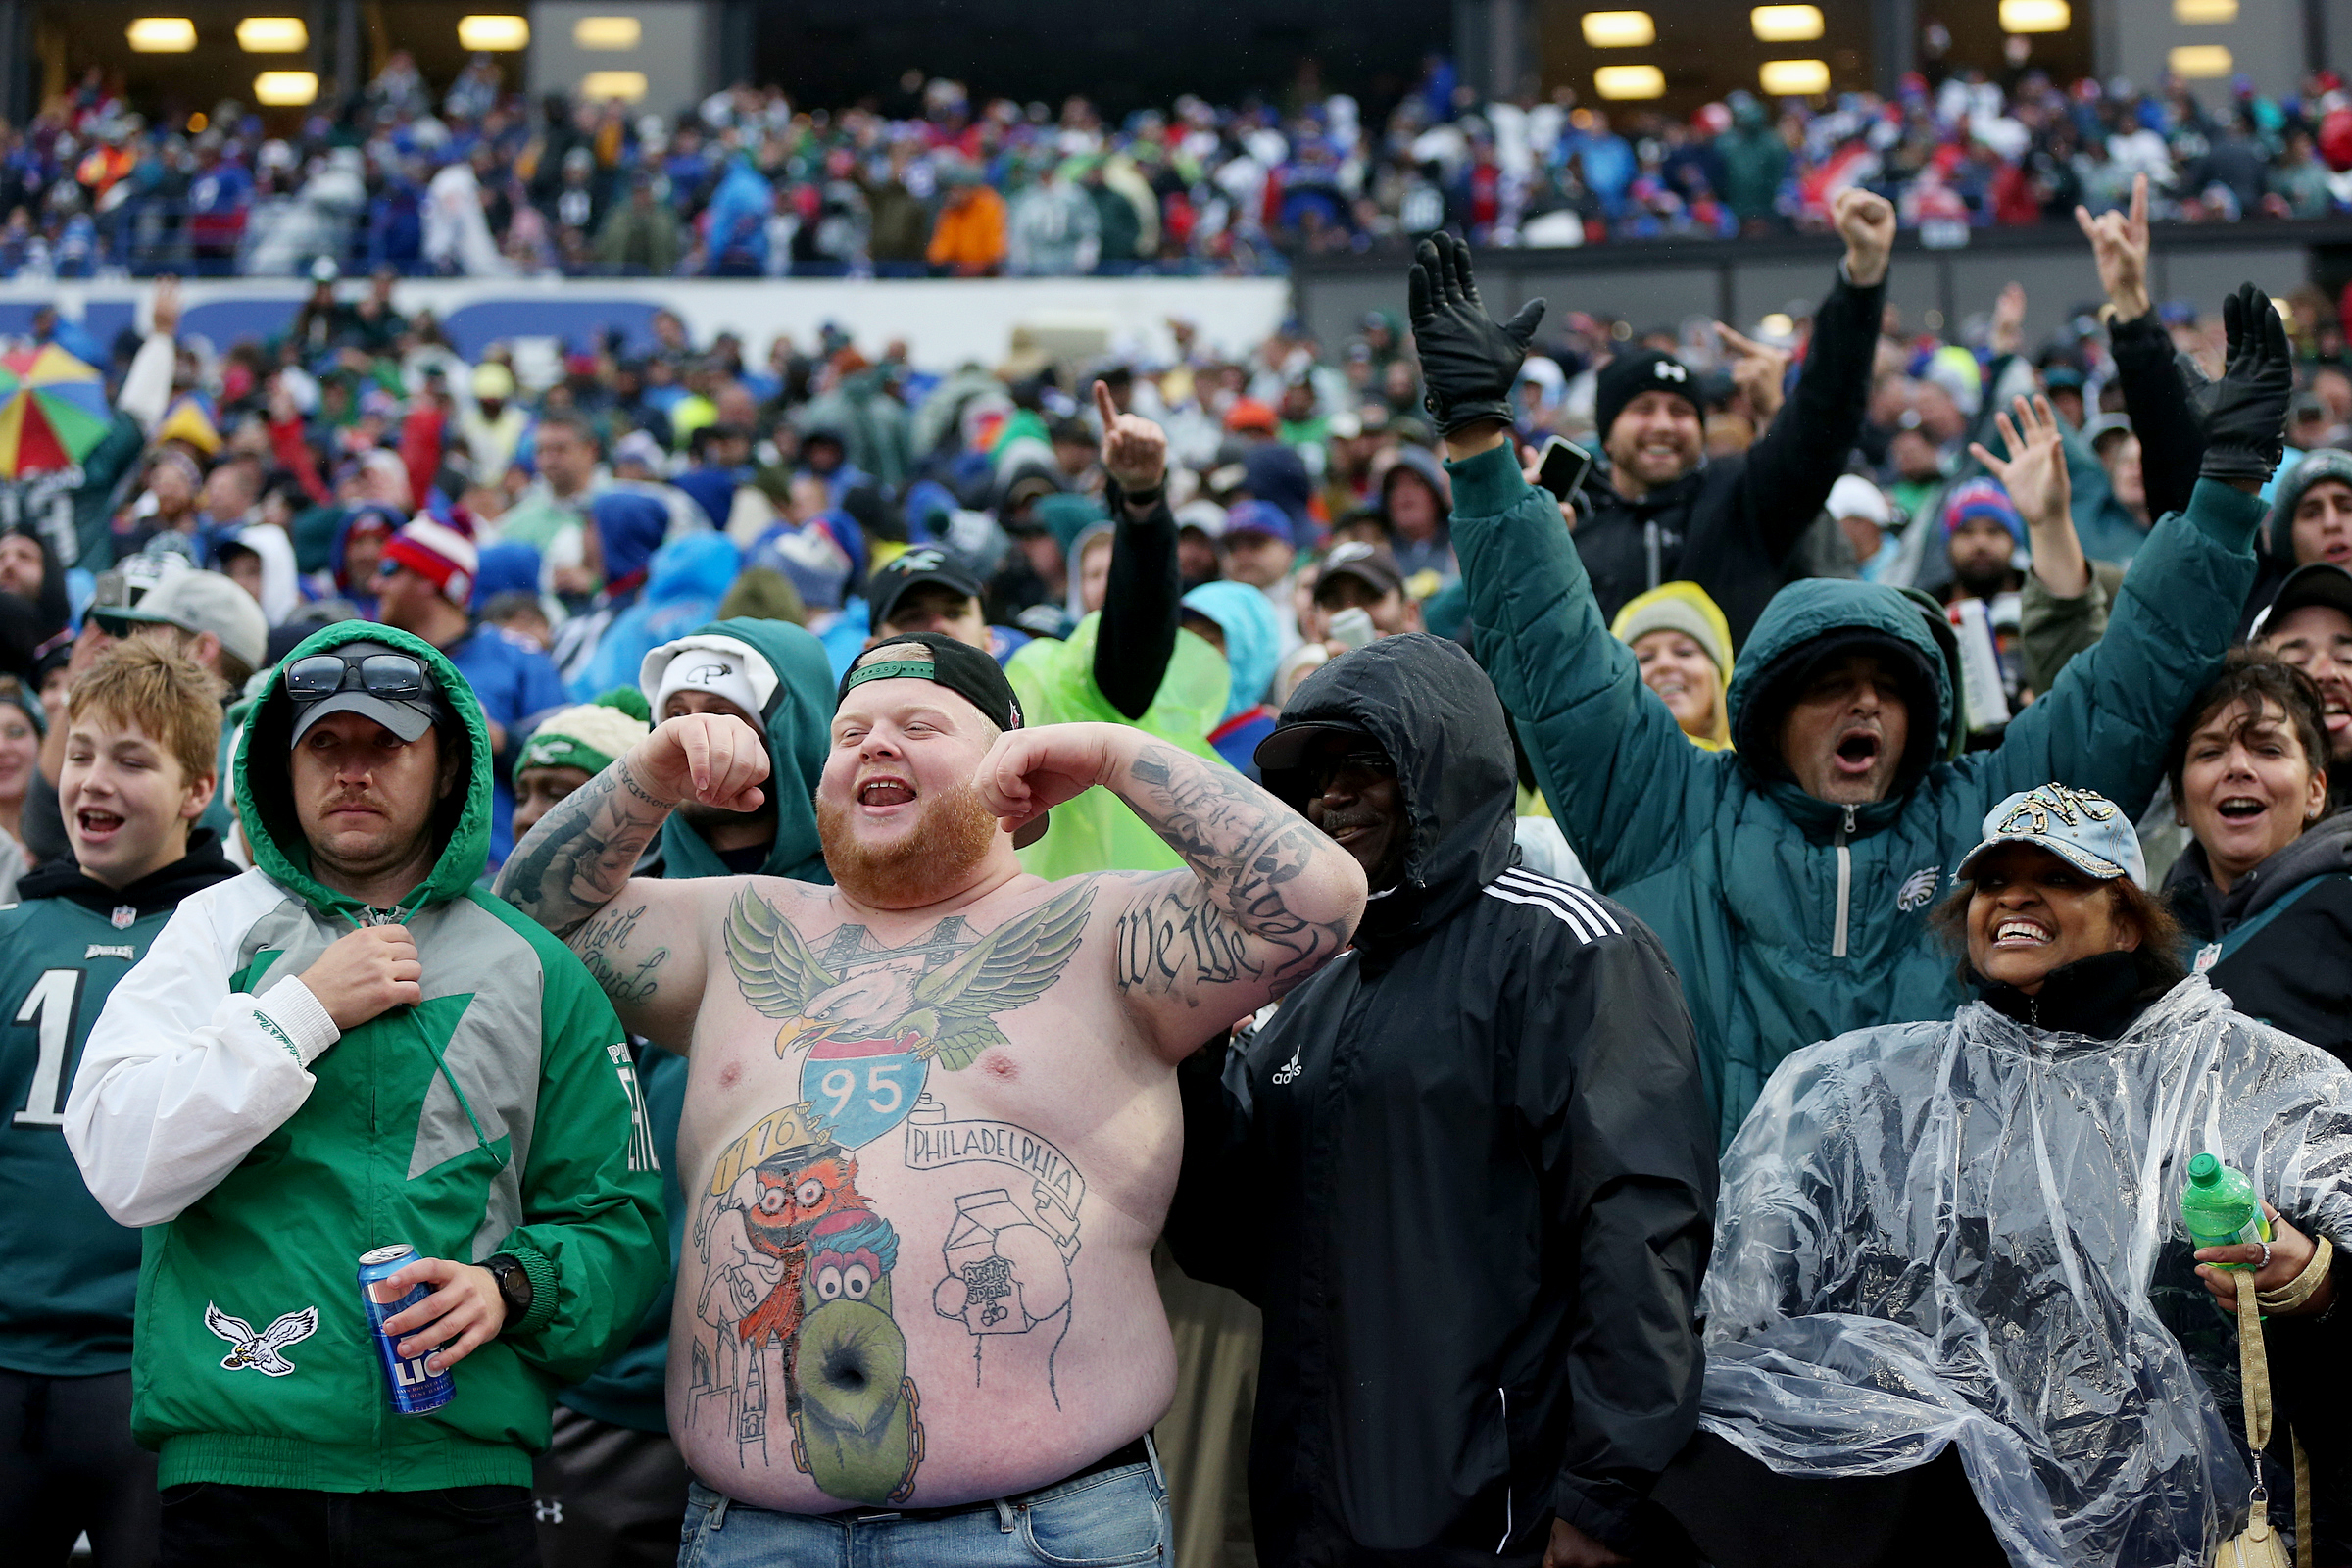 Rob Dunphy the Phanatic tattoo guy is ready for an epic Philly sports  weekend